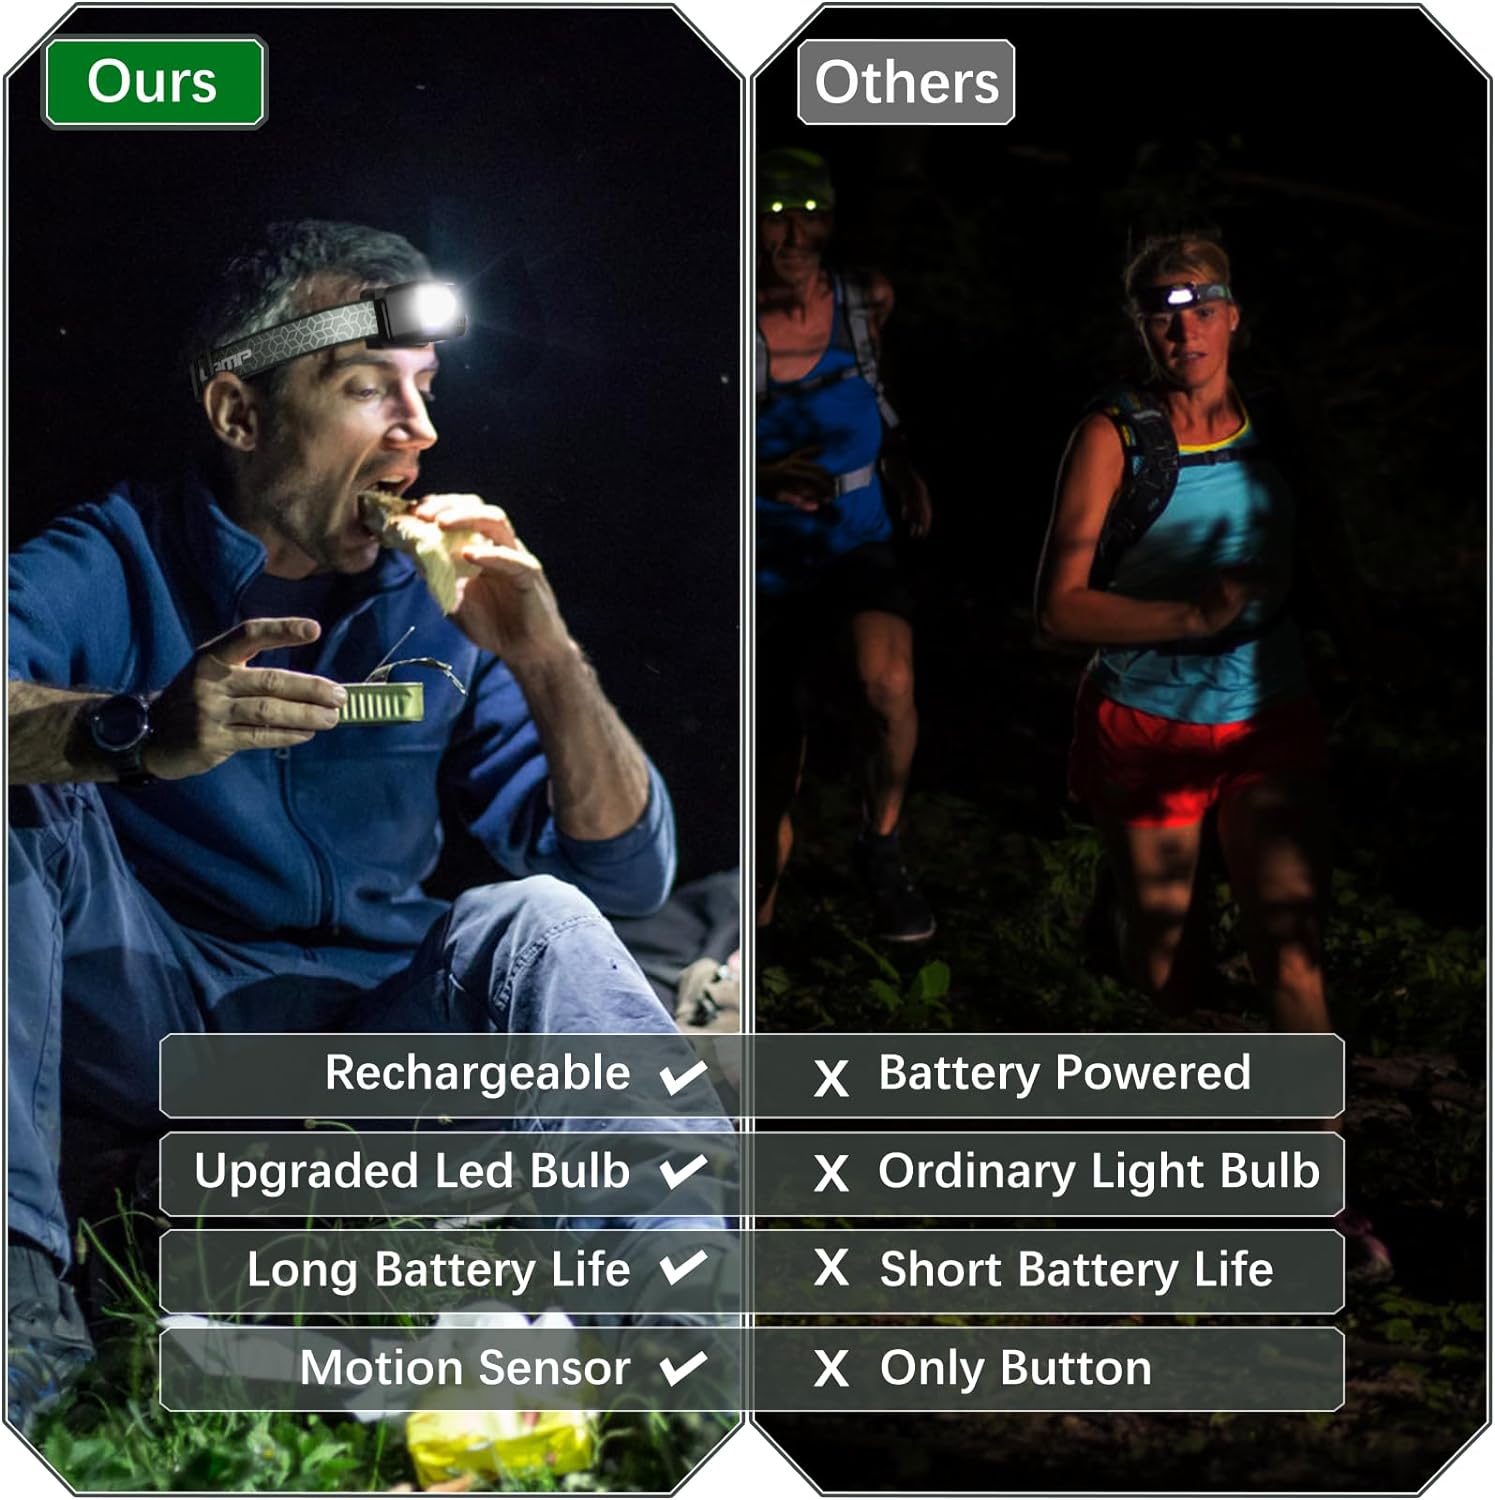 2 Pack Rechargeable LED Headlamp, 1500 Lumen Head Lamp with Motion Sensor, Bright Head Light with 7 Modes, USB Recharge Flashlight Camping Accessories, Waterproof Headlight Camping Gear for Outdoors